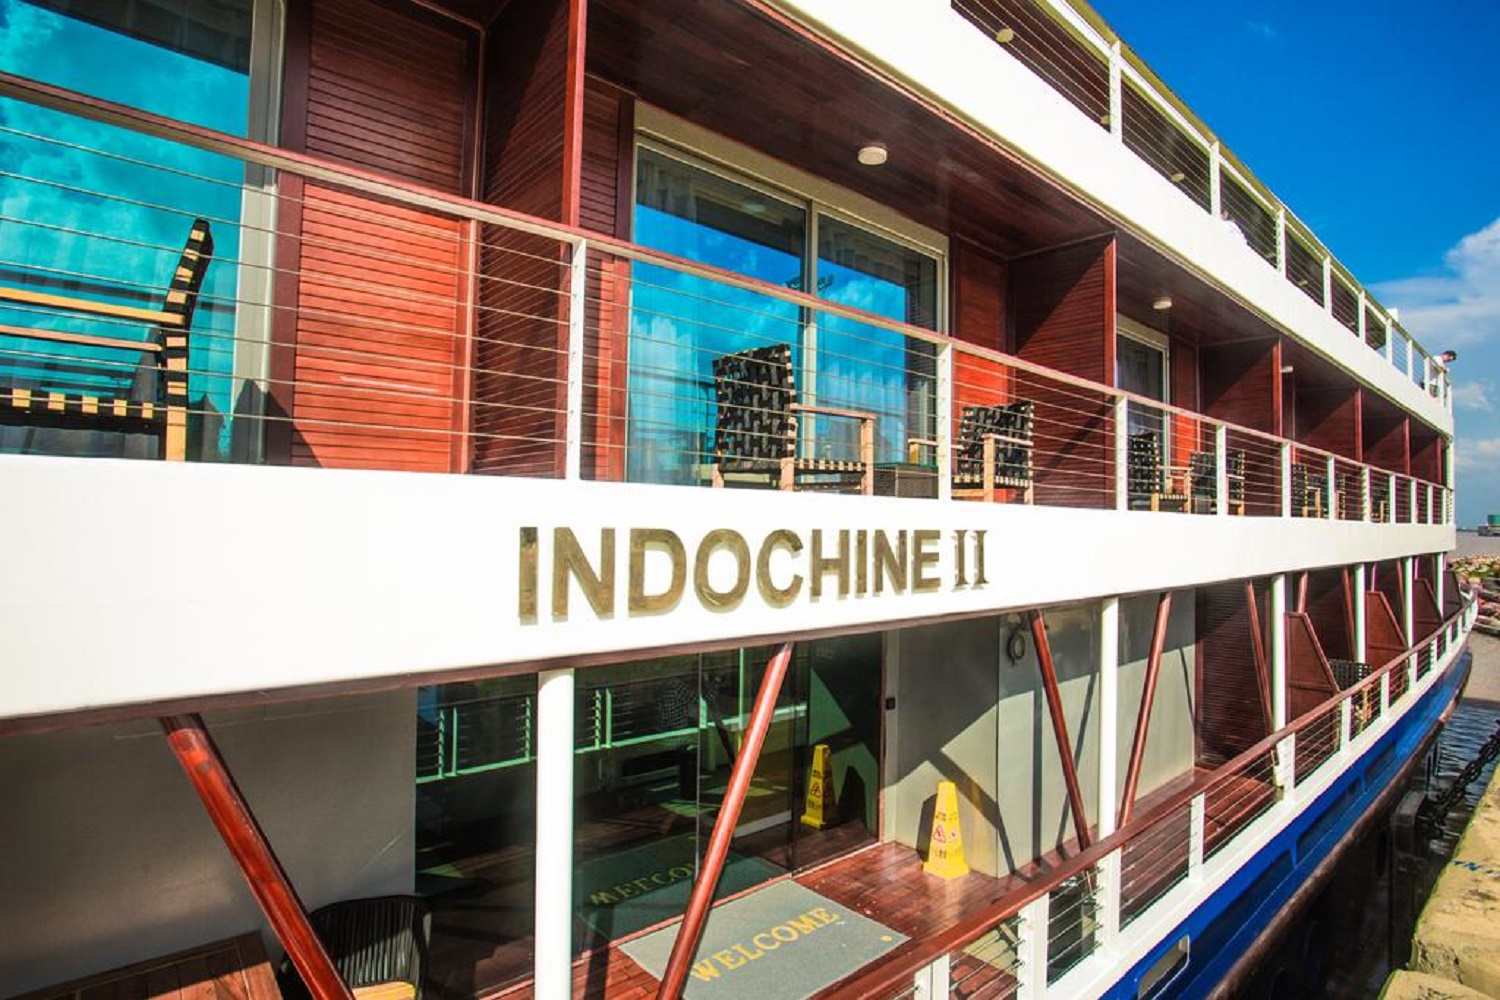 Downstream journey: Siem Reap - Mekong Delta - Ho Chi Minh City (port-to-port cruise)